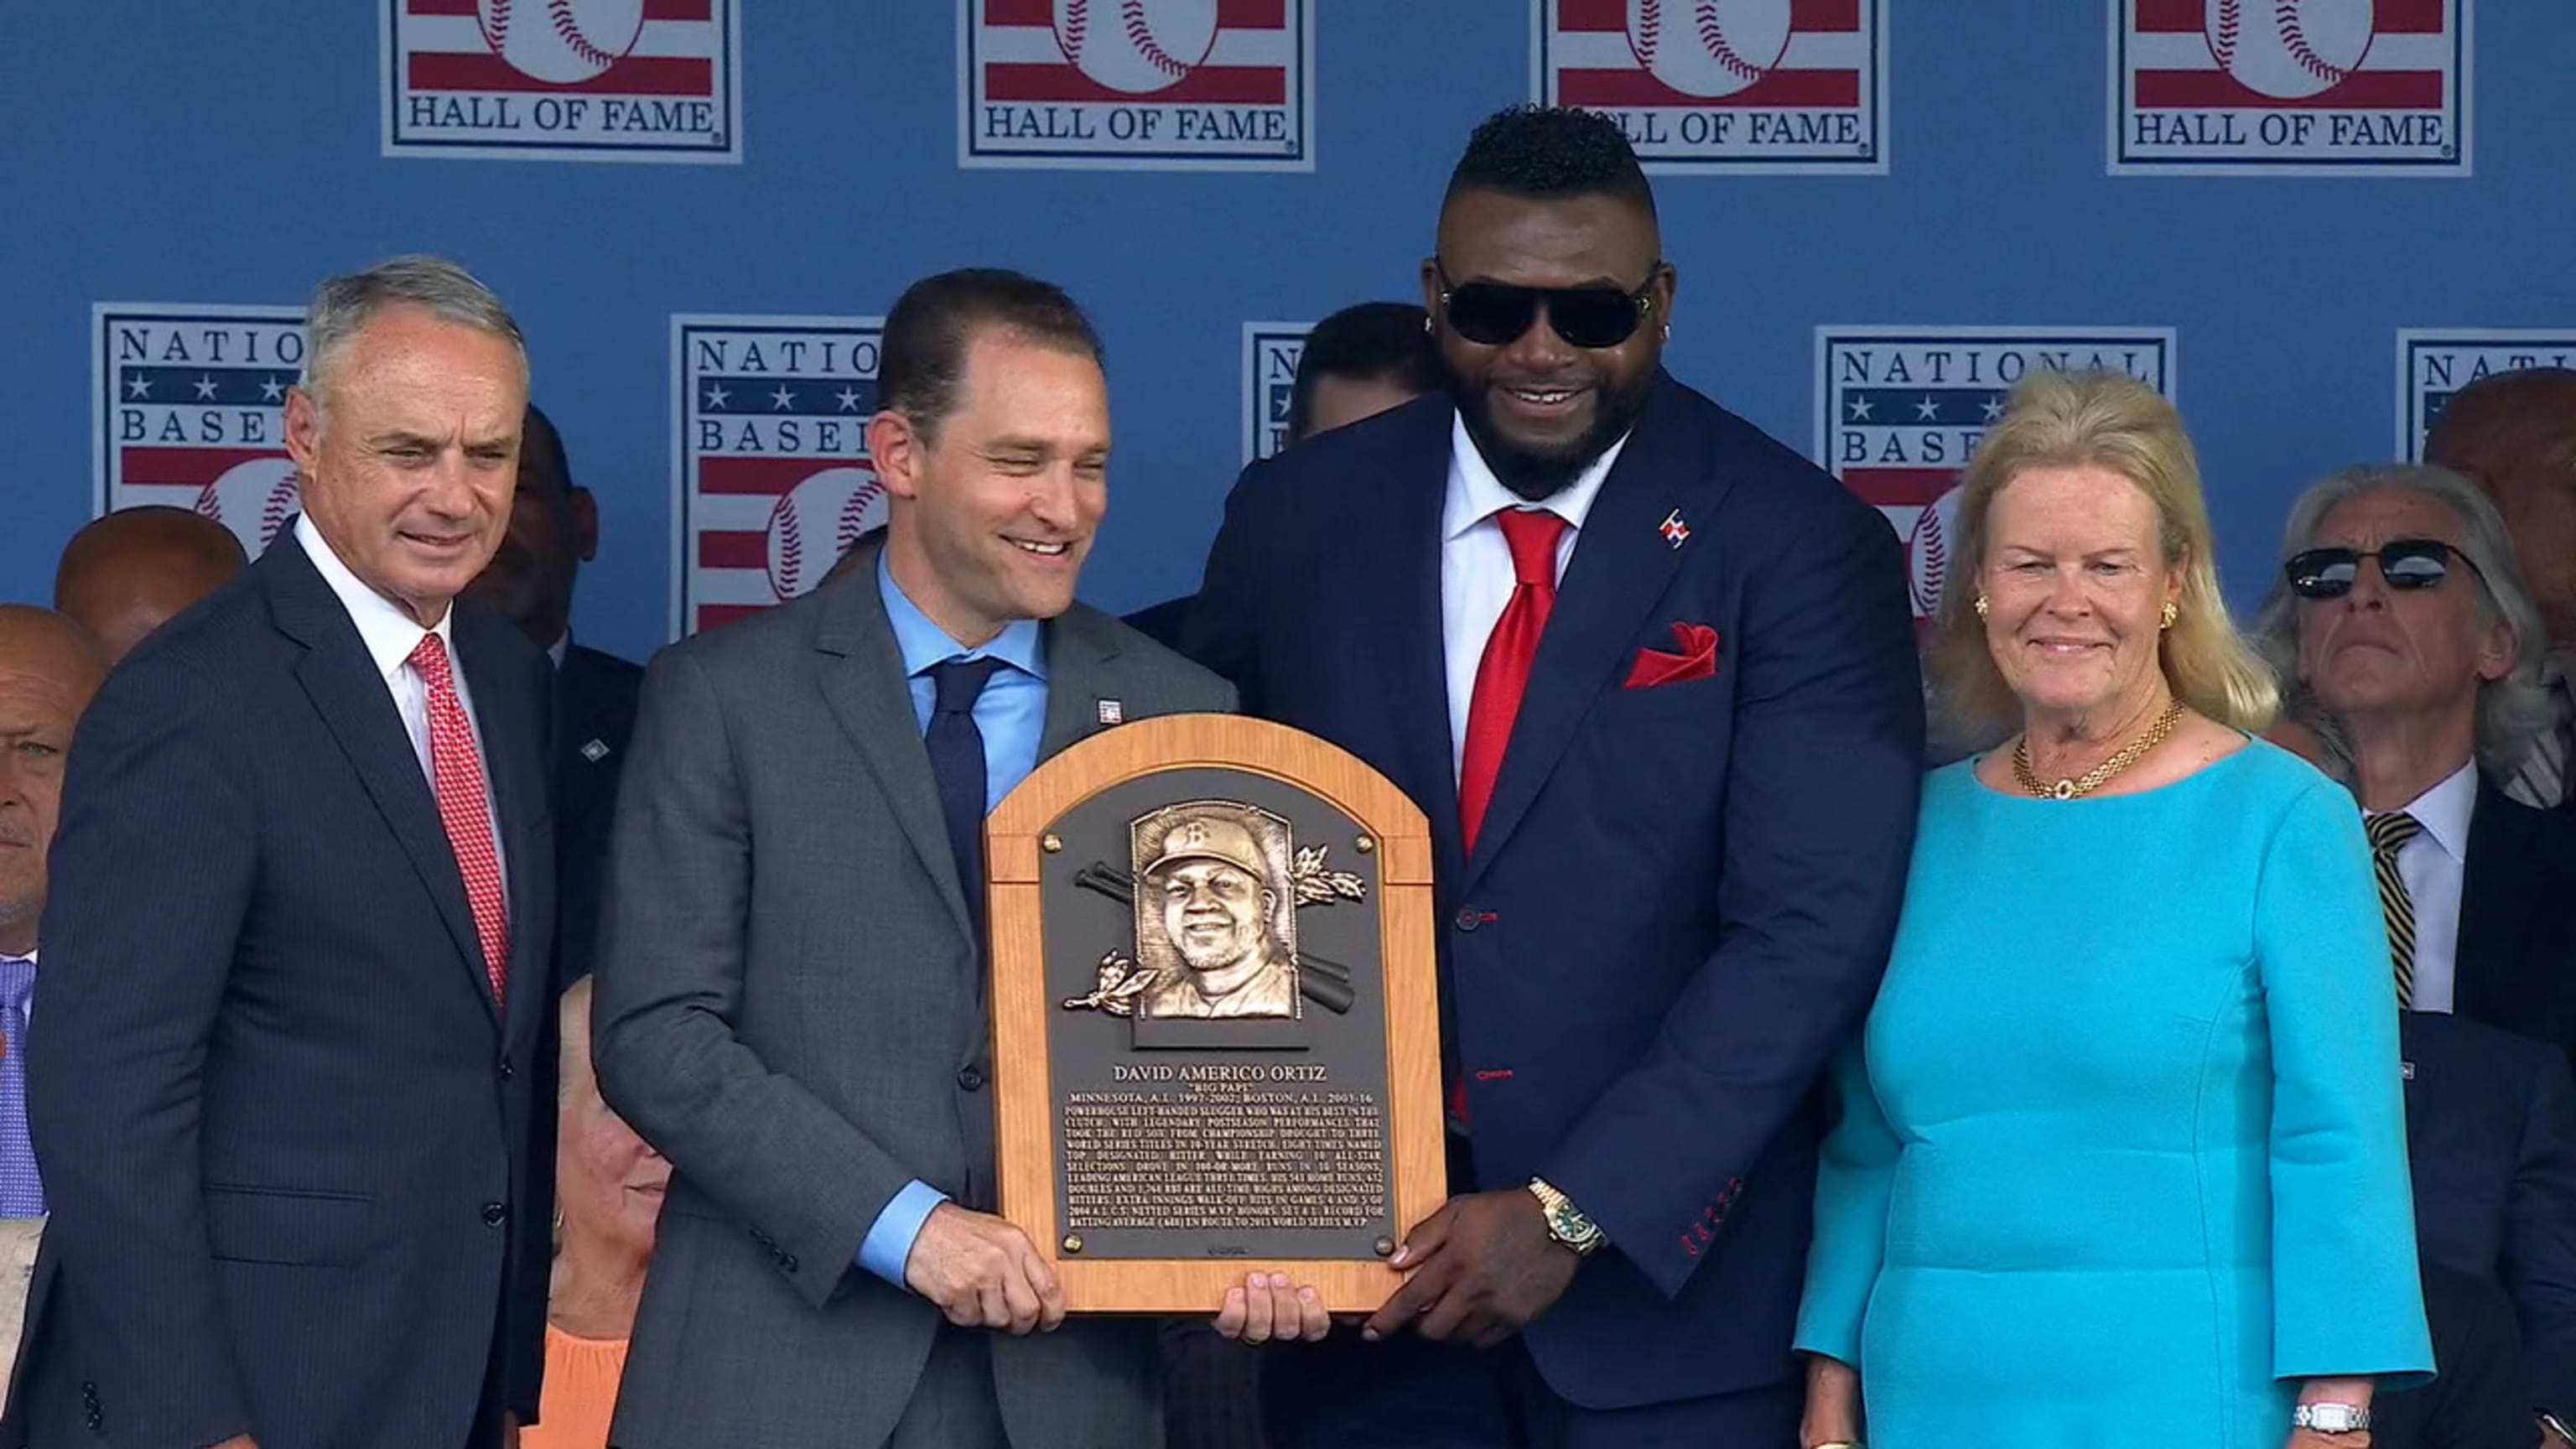 MLB Hall of Famer David Ortiz reveals he is the victim of an